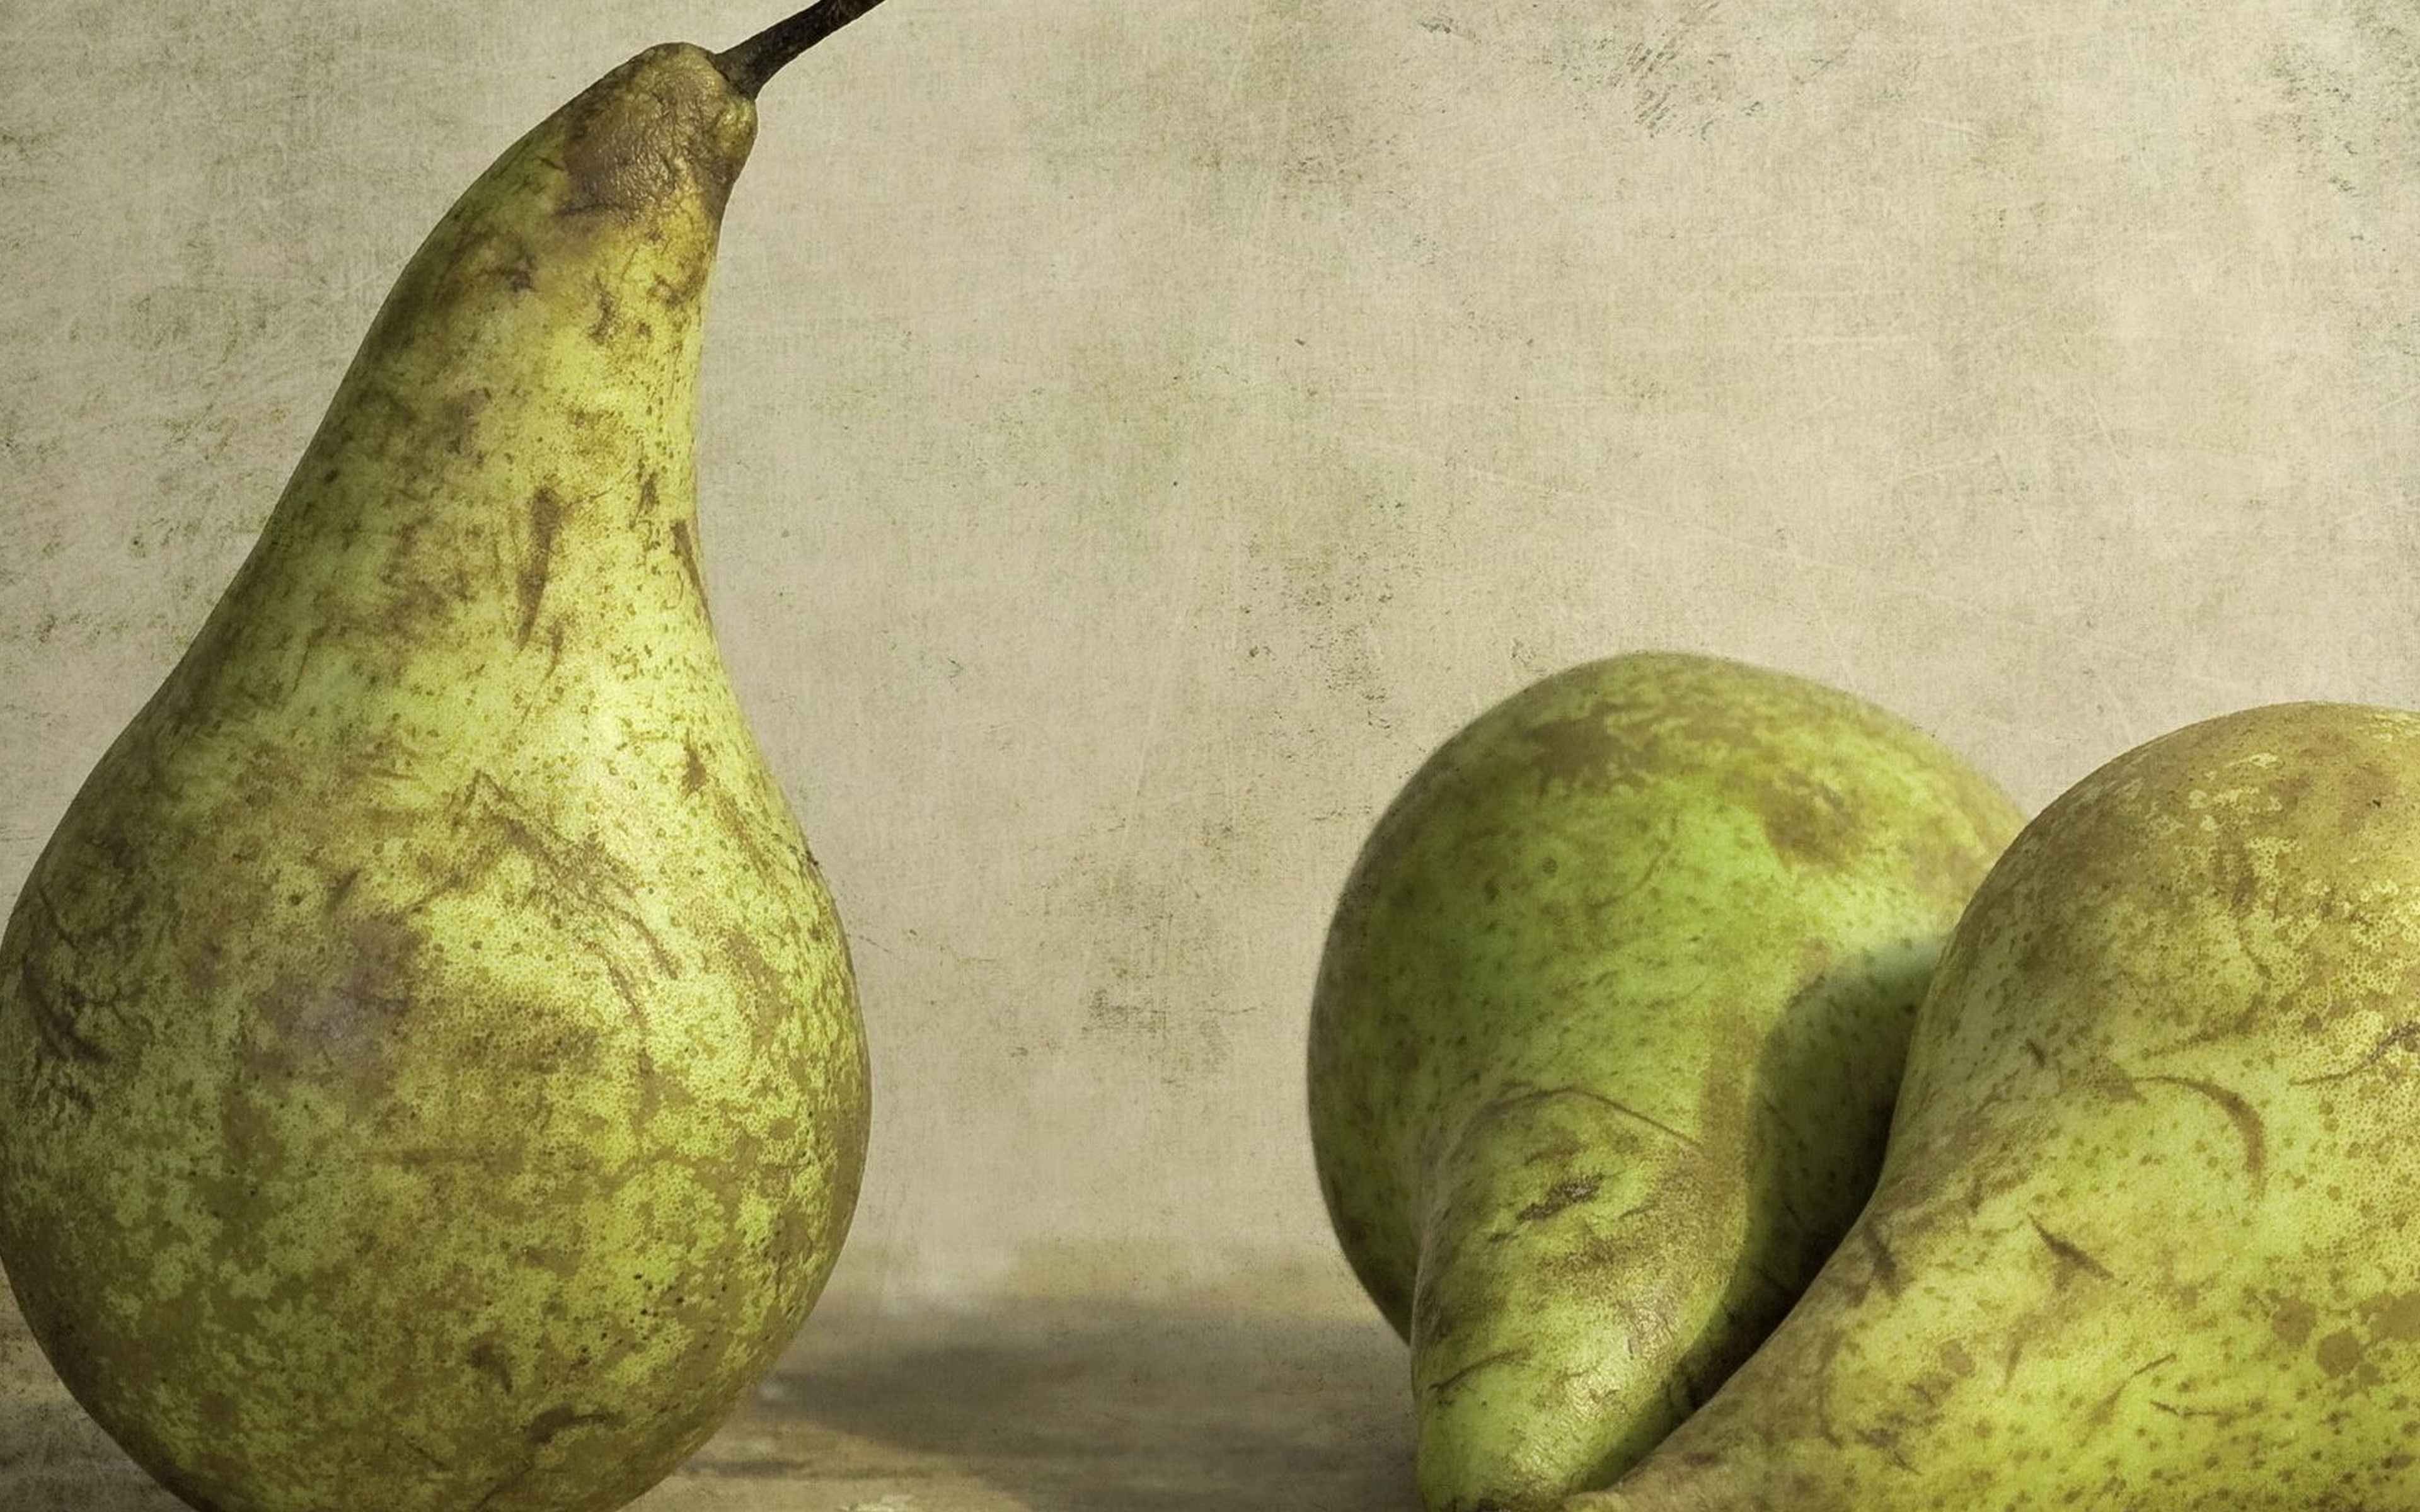 Mazzone pear. Груша Армут. Зеленая груша. Текстура груши. Натюрморт.